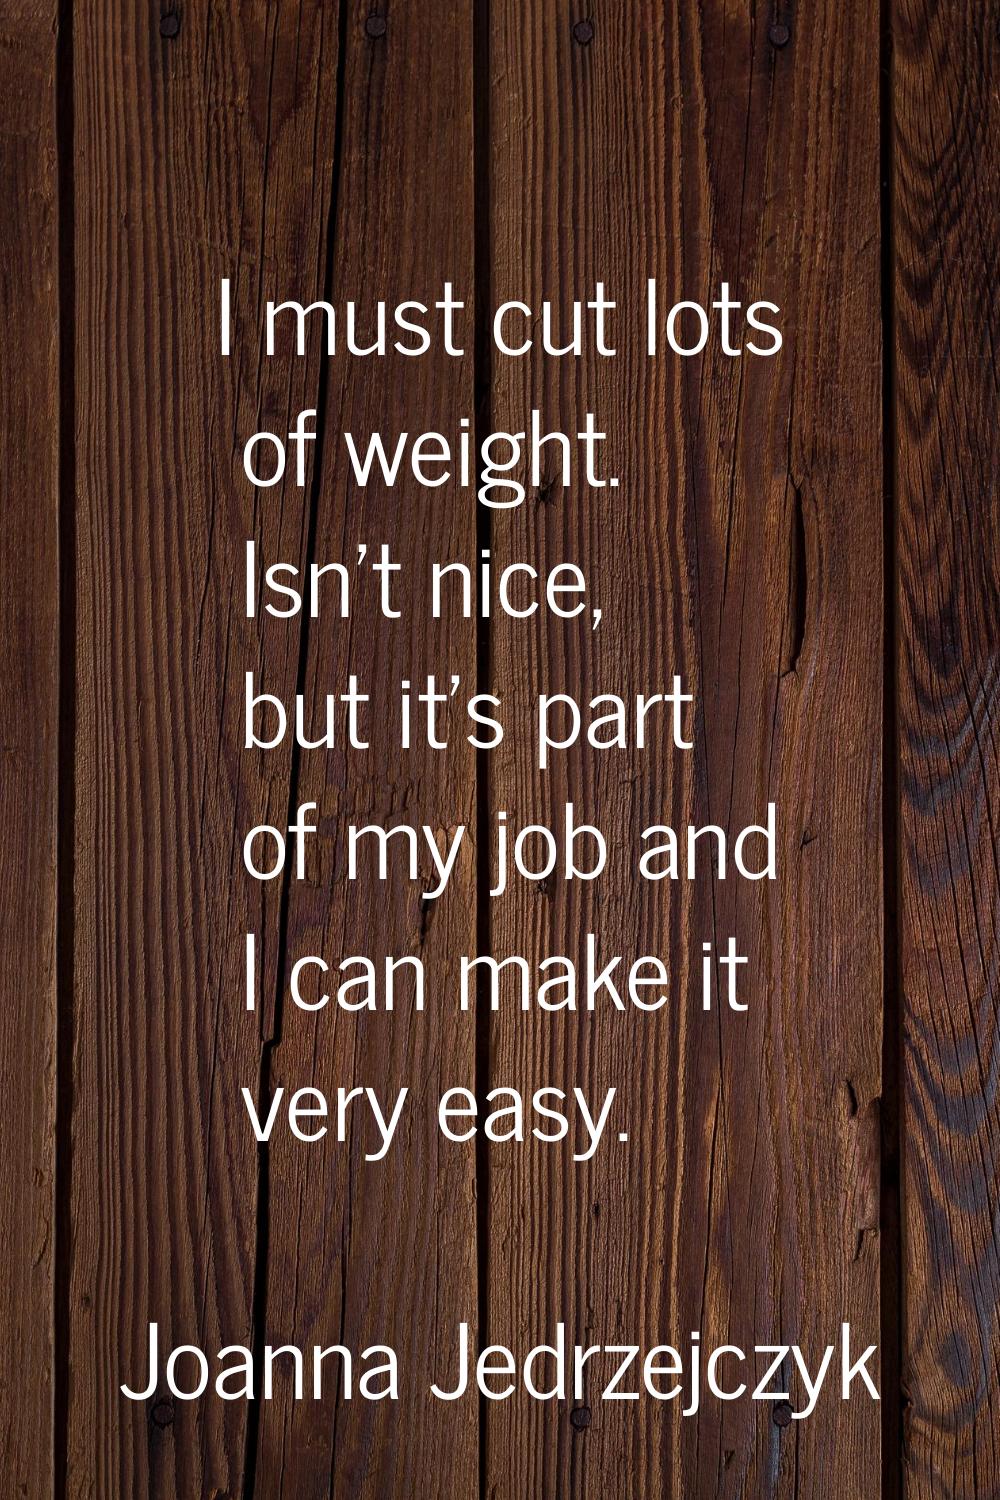 I must cut lots of weight. Isn't nice, but it's part of my job and I can make it very easy.